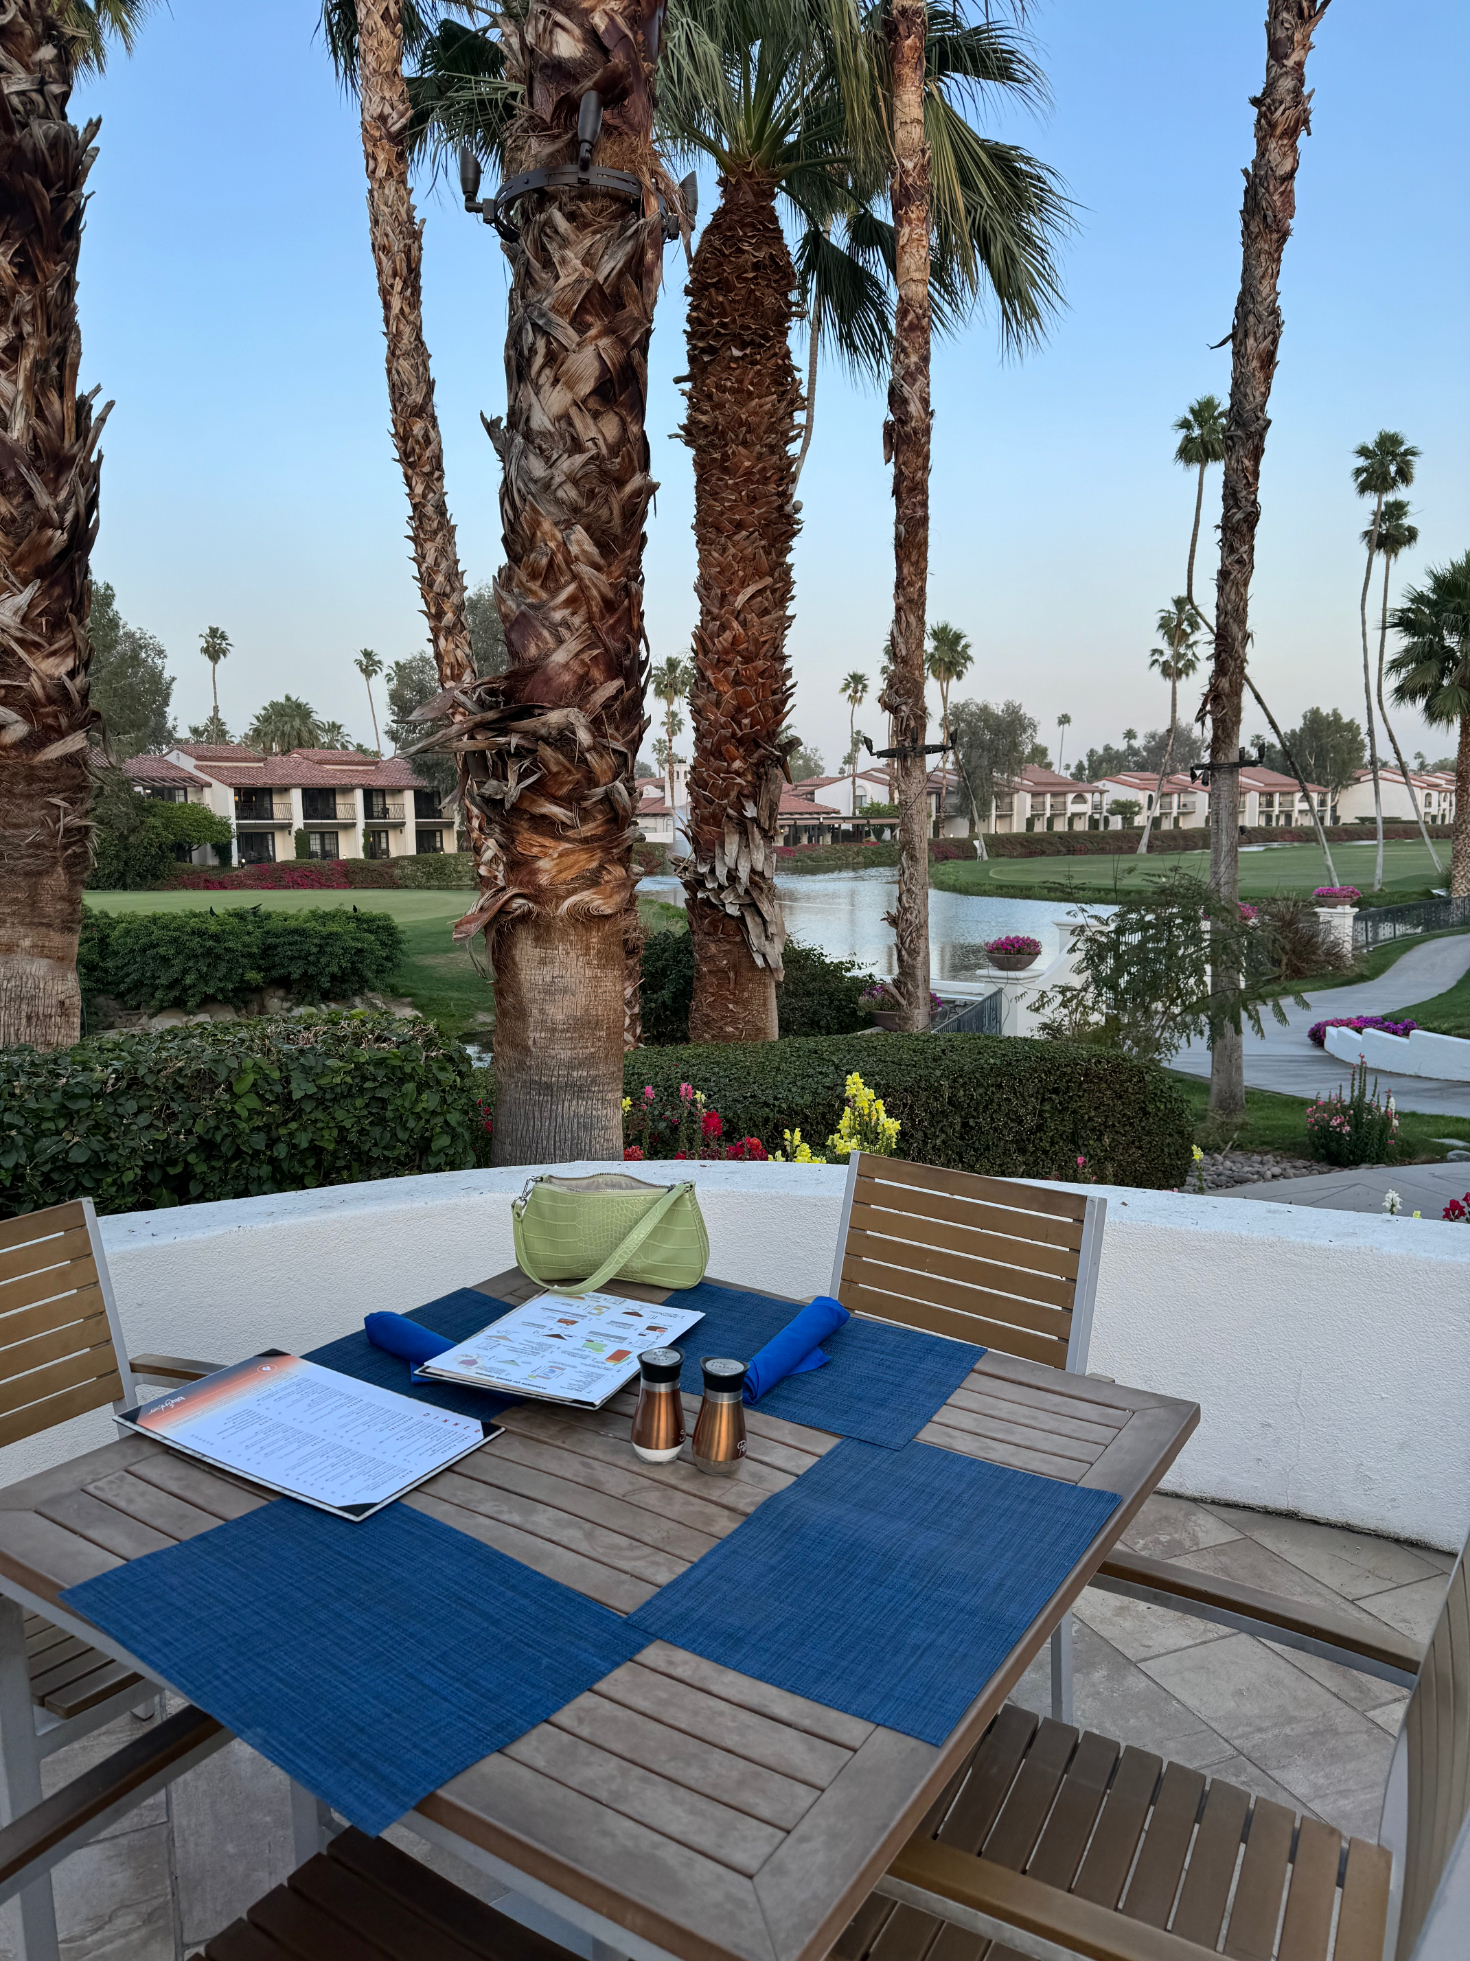 Outdoor dining table set with notebooks, overlooking a pond with palm trees in the background